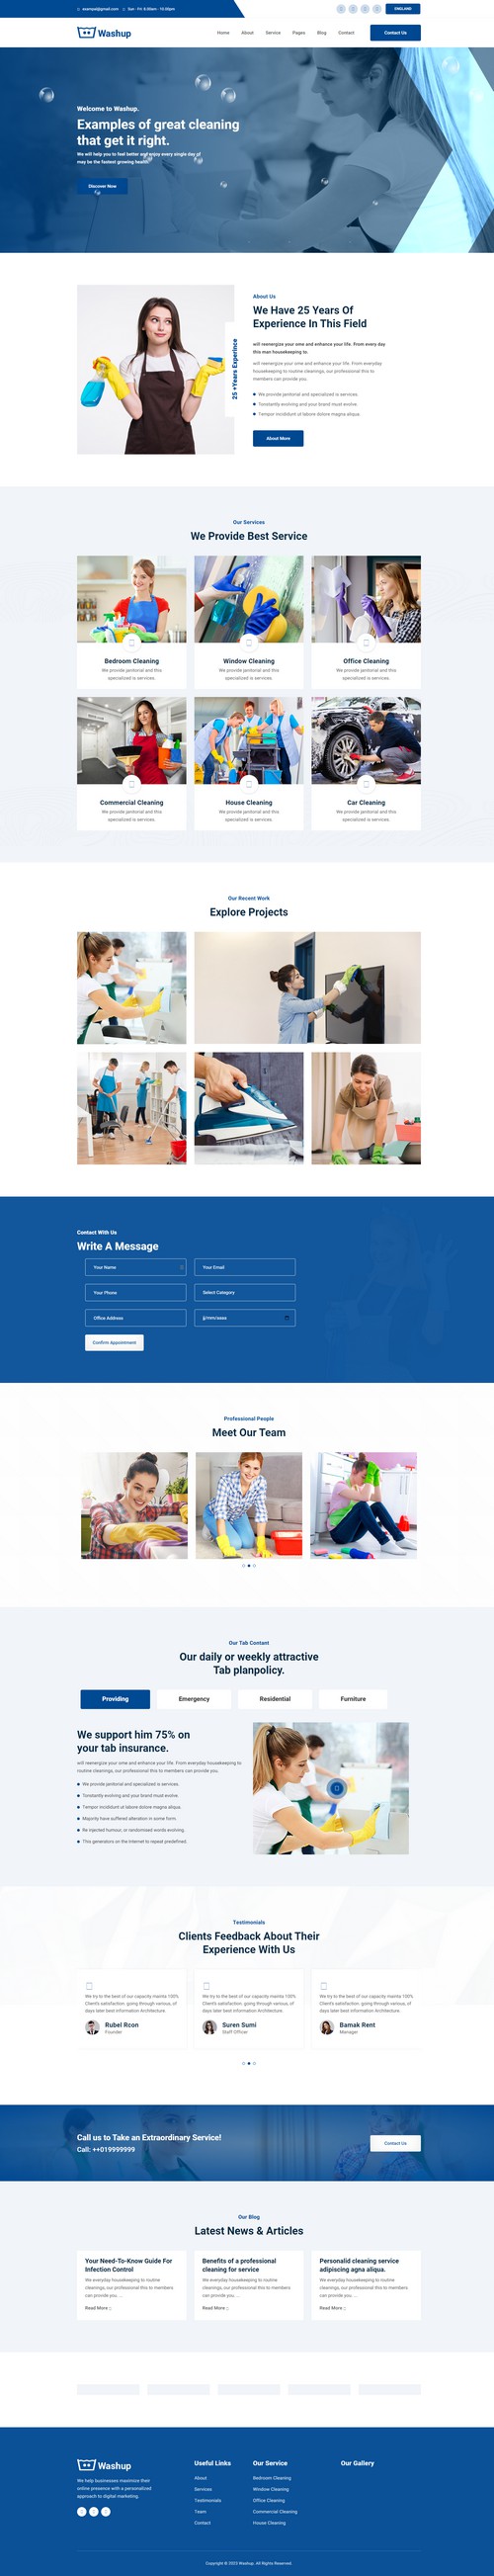 Washup - Cleaning Services Joomla Template